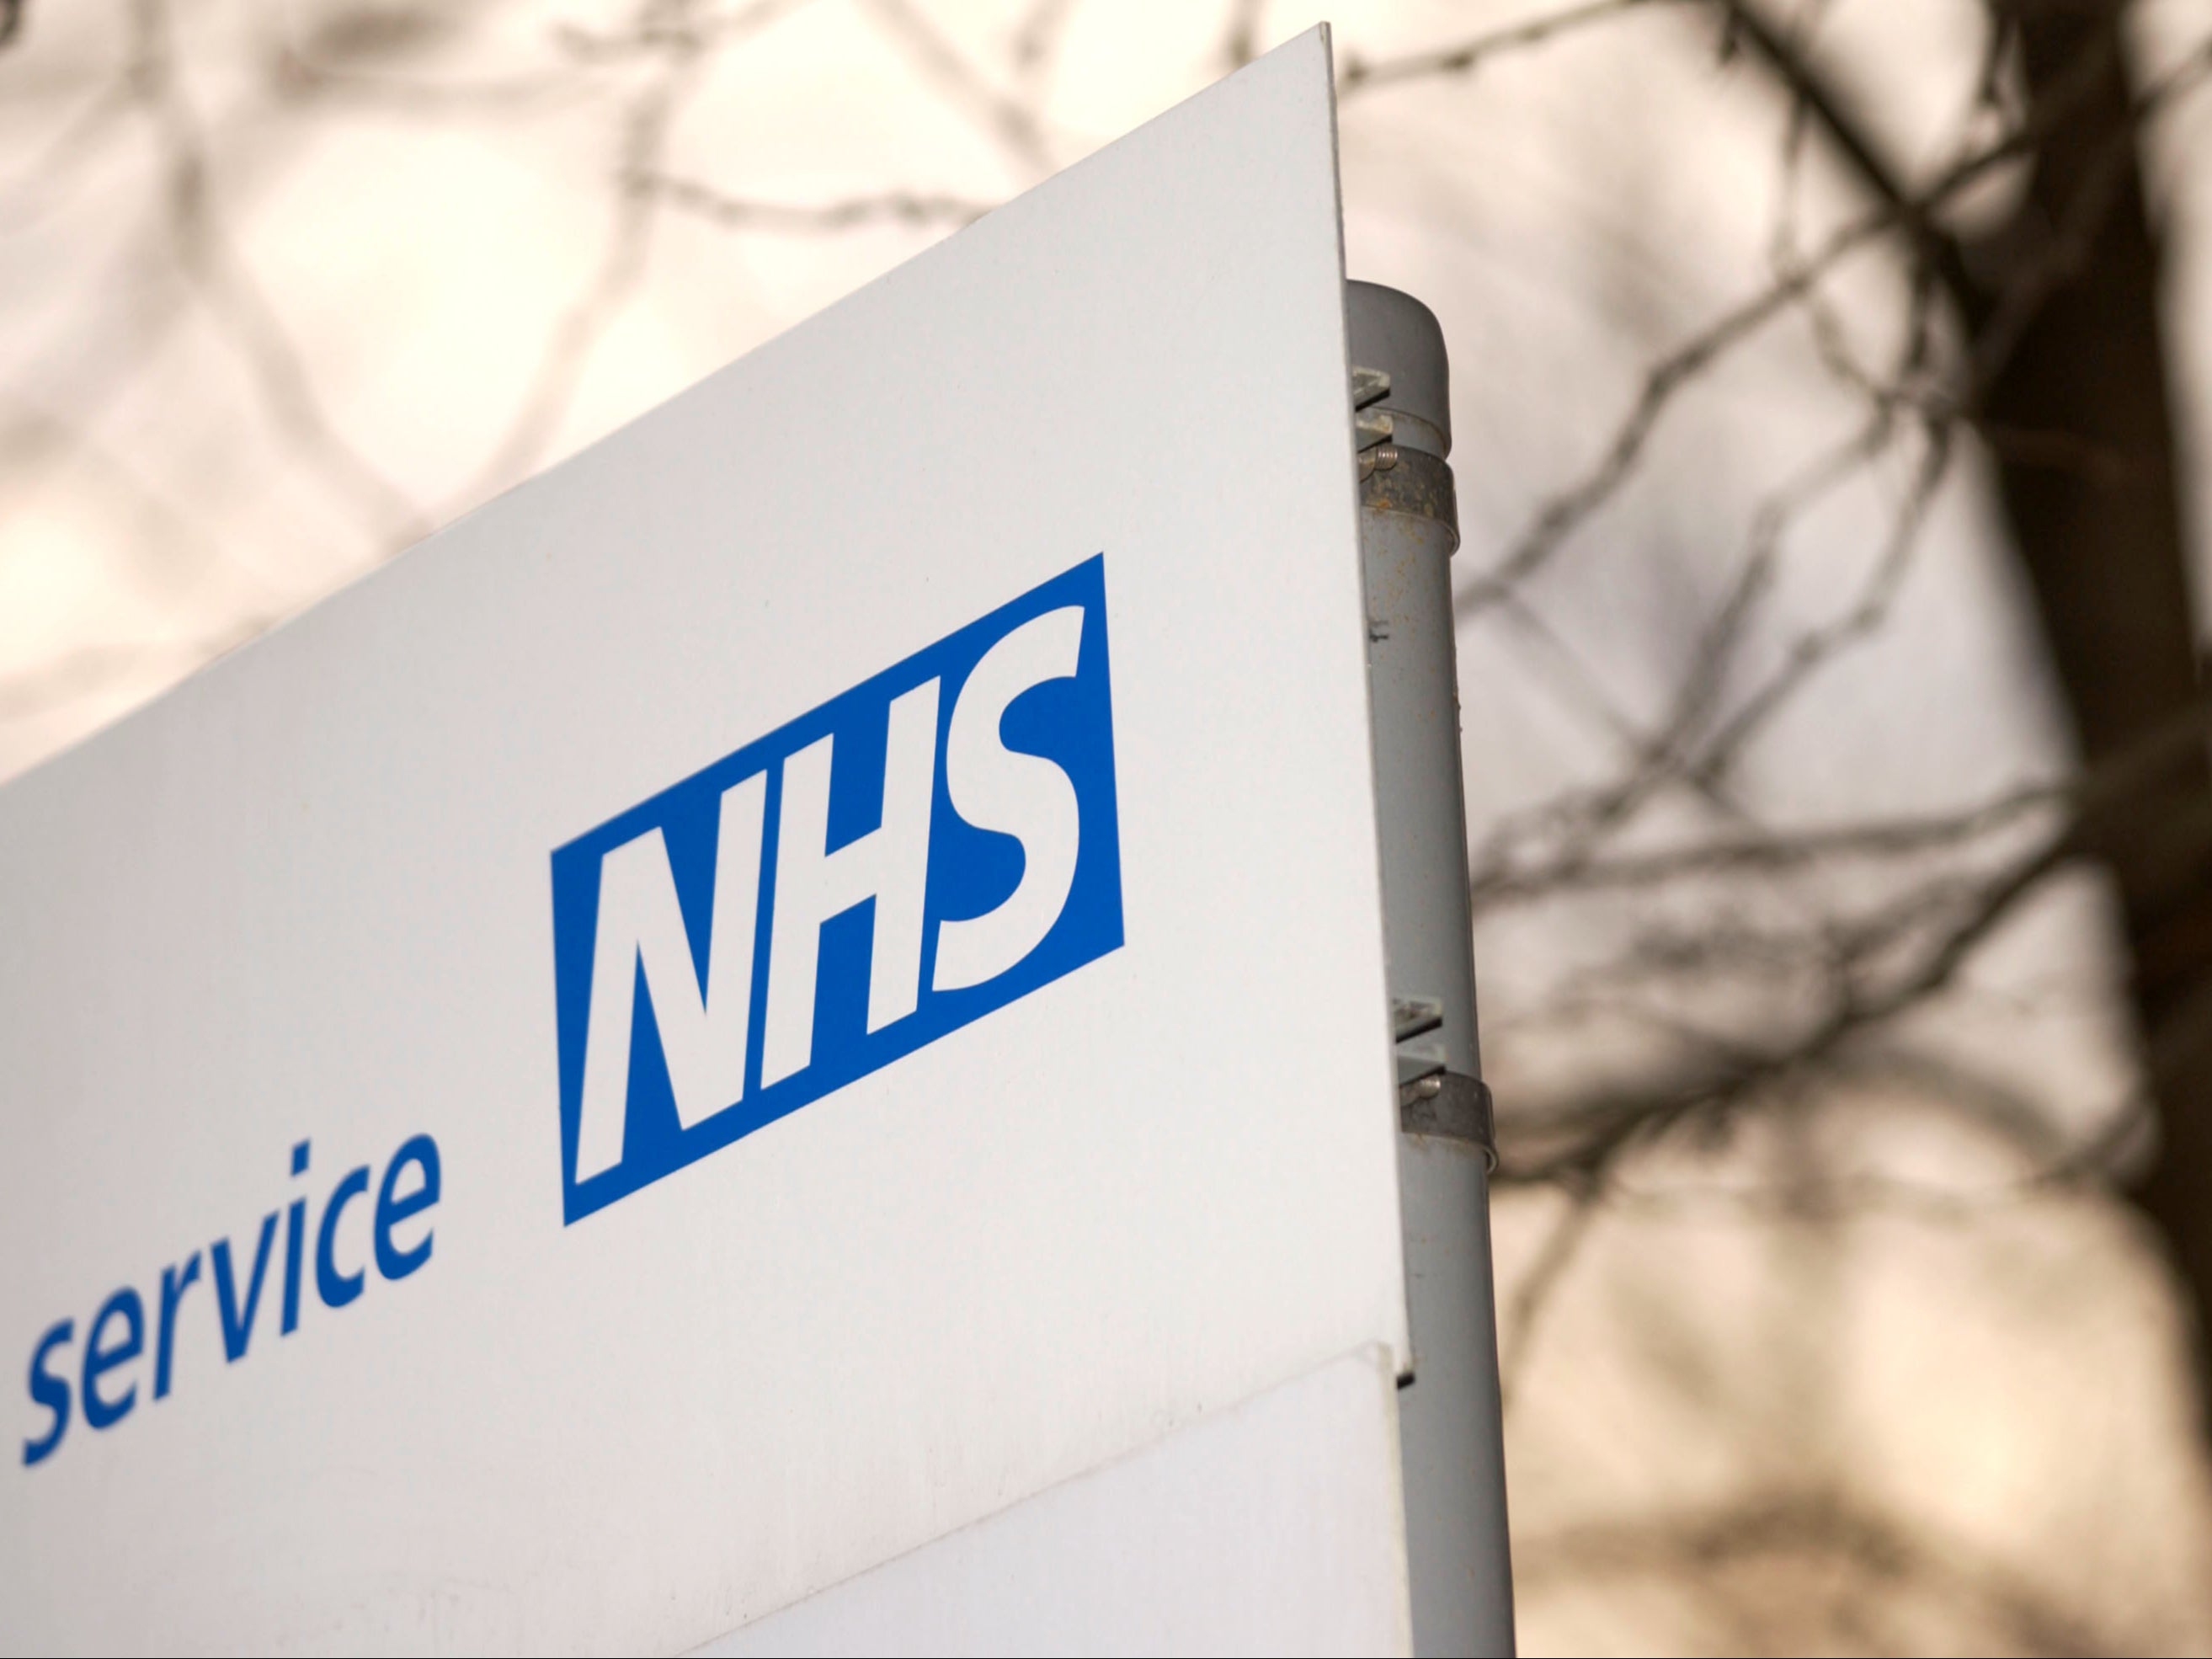 An NHS-wide survey reveals that 58,000 staff reported unwarranted sexual approaches from patients or other members of the public last year